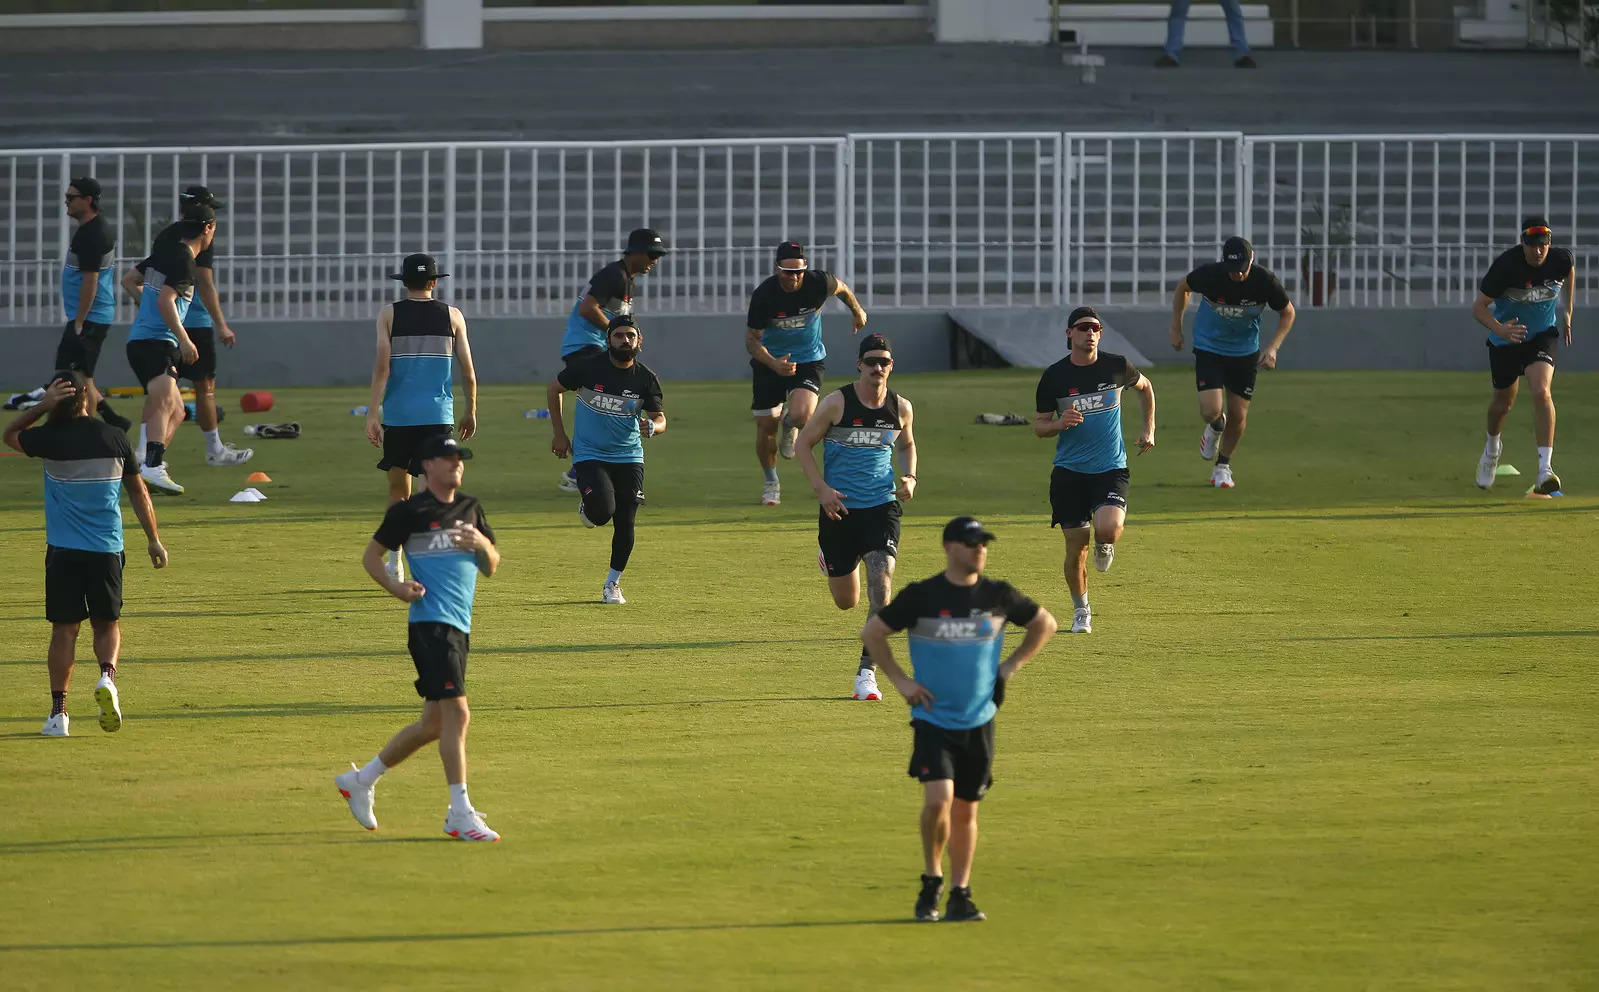 Govt claims NZ Cricket received threat emails from Mumbai, using a Singapore VPN